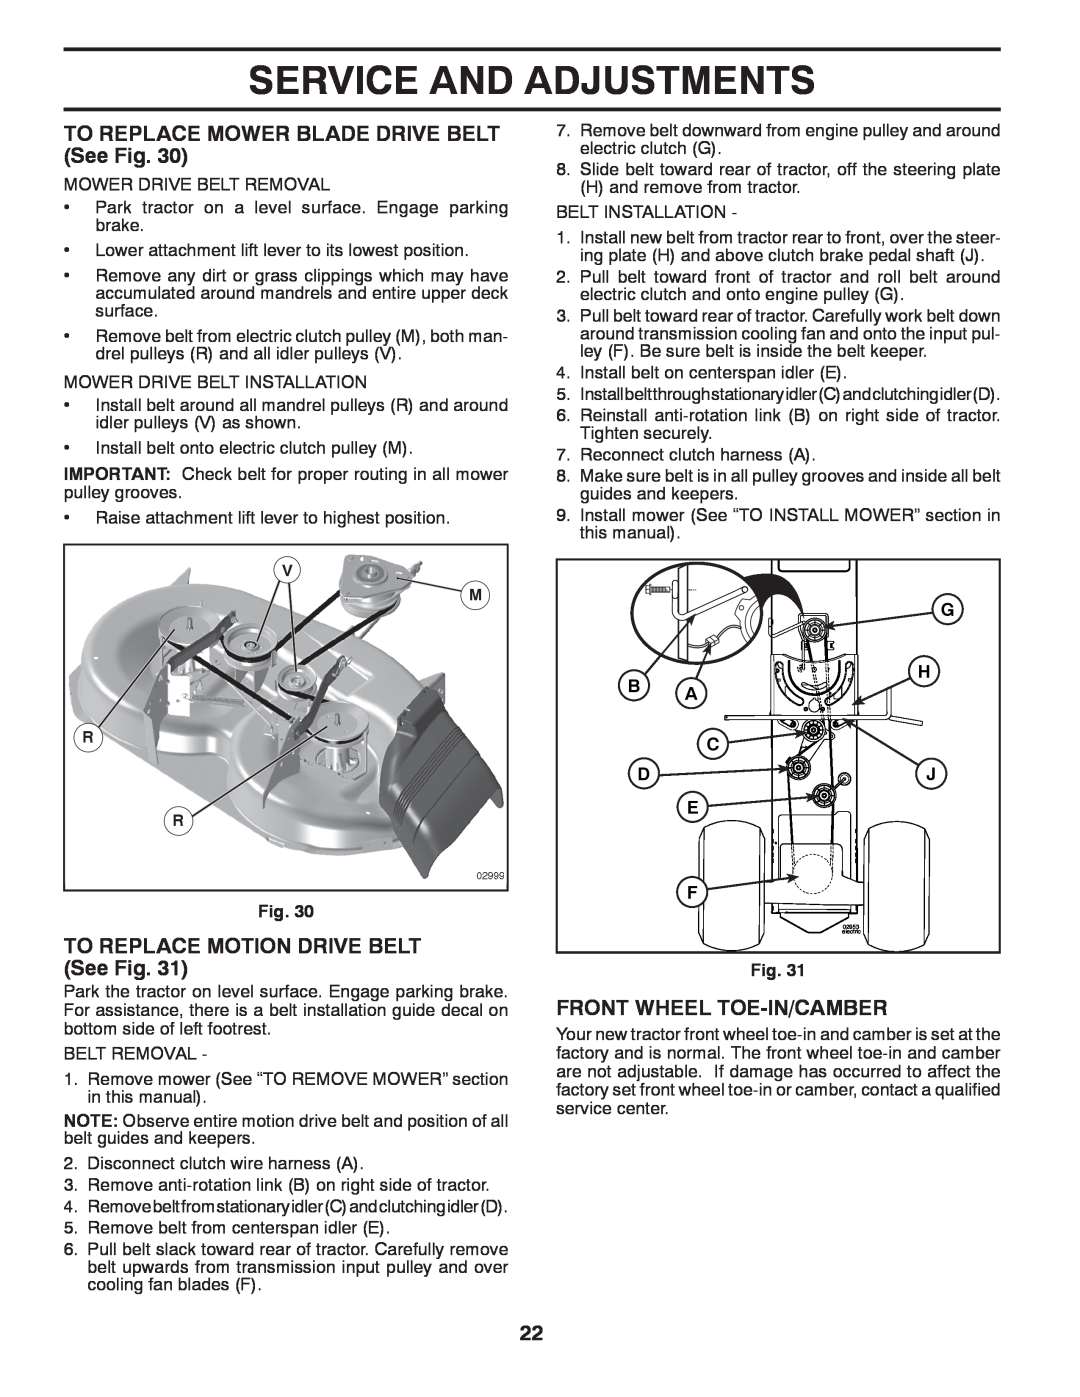 Dixon 433616 TO REPLACE MOWER BLADE DRIVE BELT See Fig, TO REPLACE MOTION DRIVE BELT See Fig, Front Wheel Toe-In/Camber 